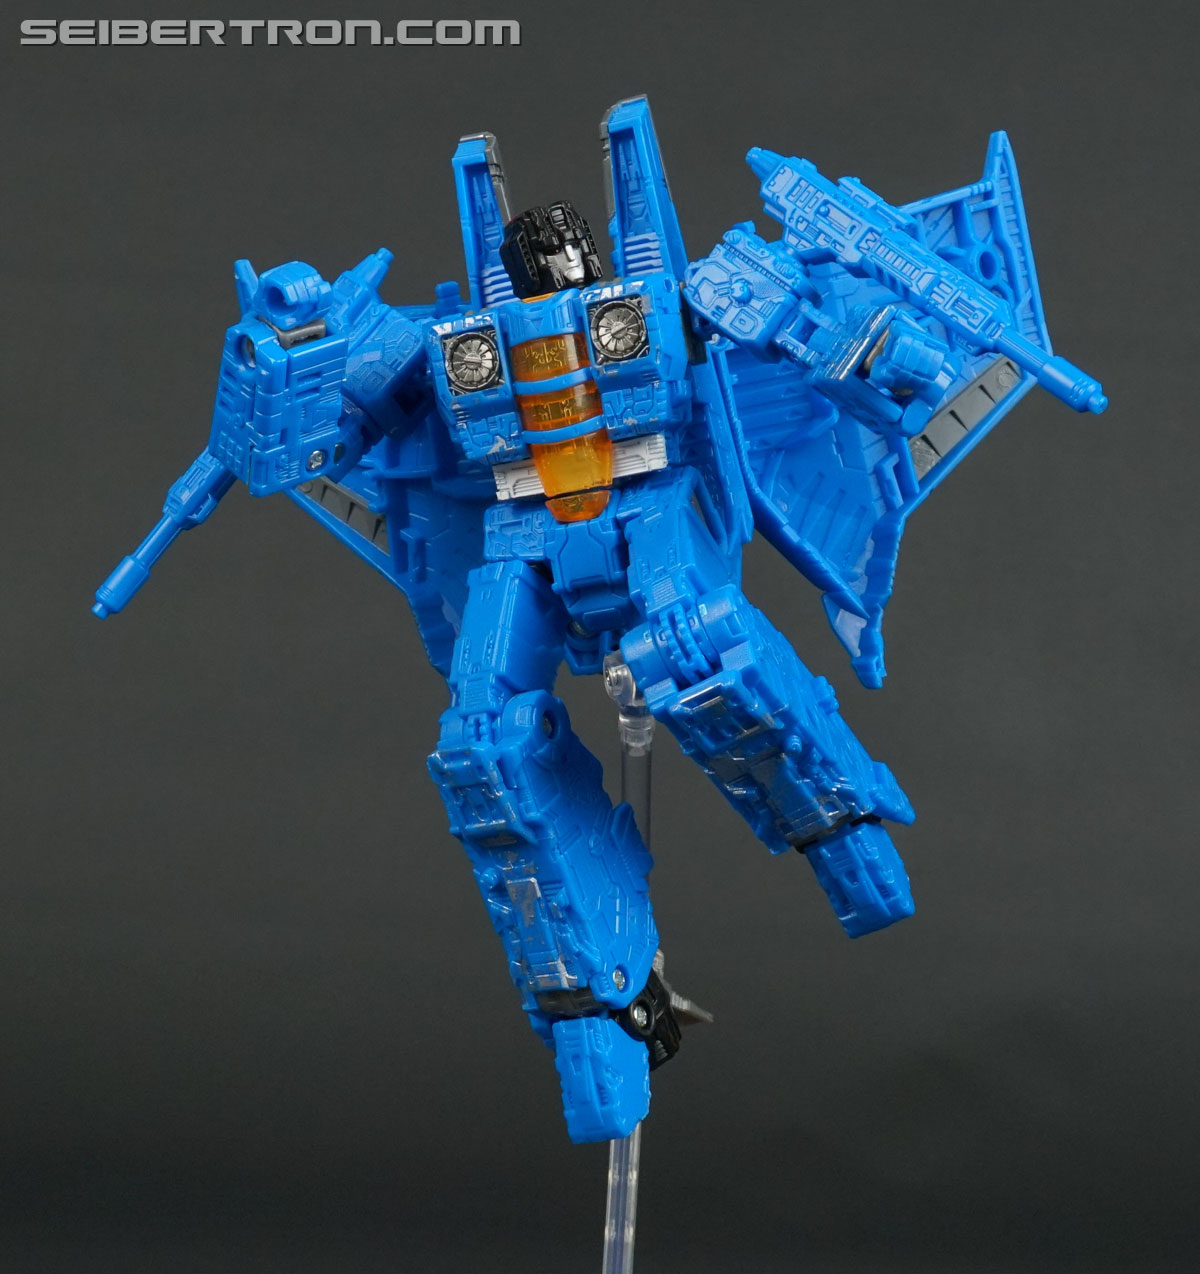 Transformers War for Cybertron: SIEGE Ion Storm (Seeker Ion Storm) (Image #87 of 111)